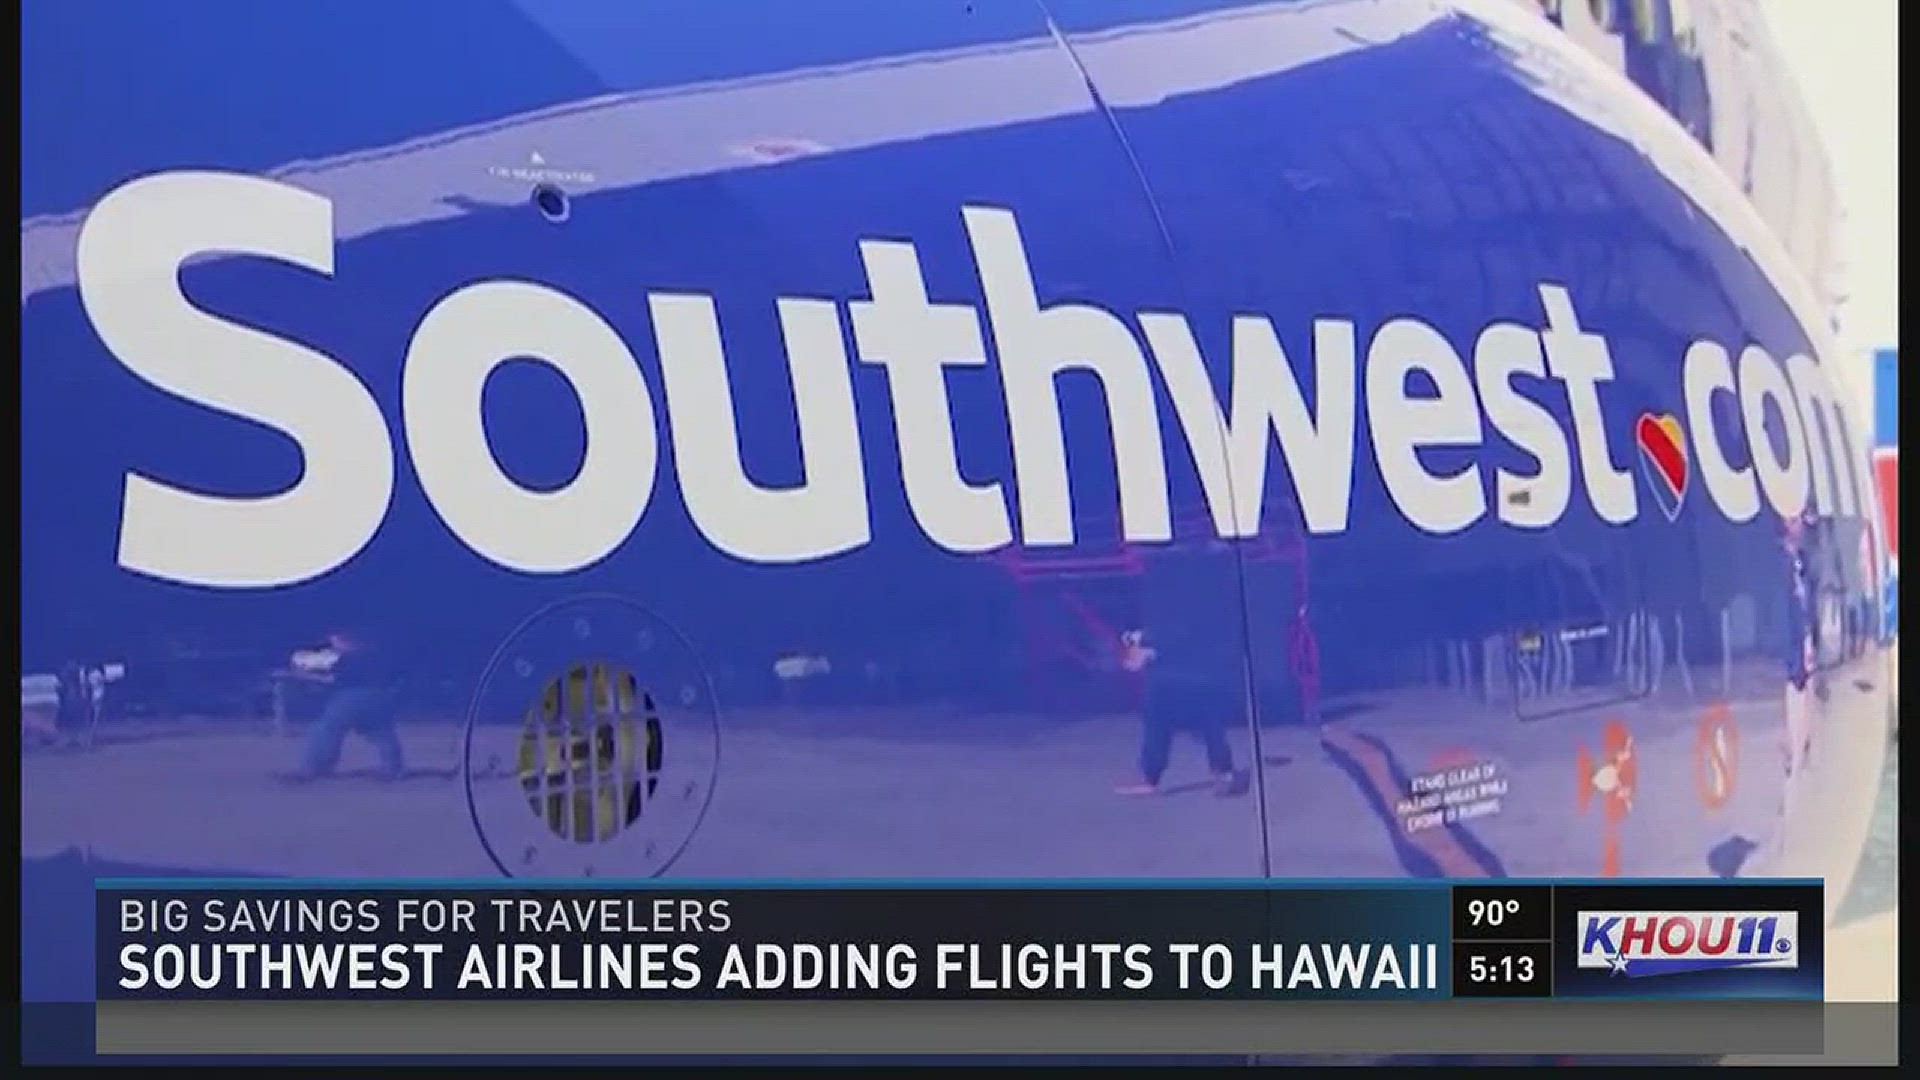 Southwest Airlines announced Wednesday it is adding flight to Hawaii.